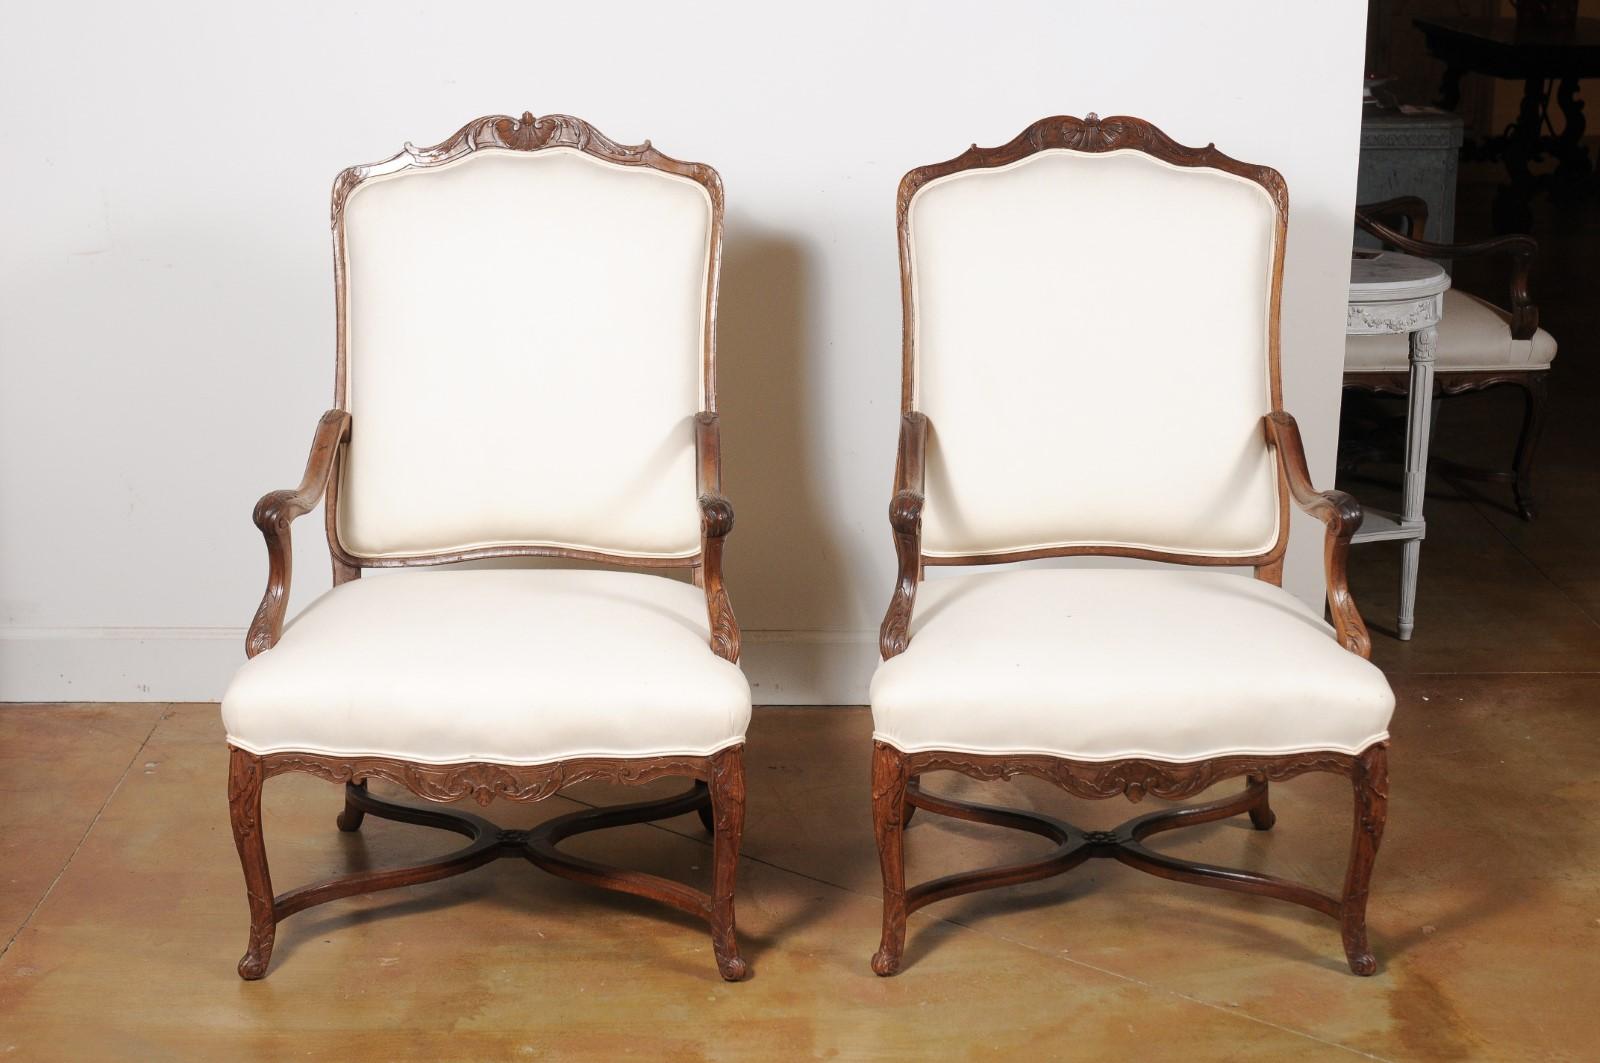 Pair of Early 18th Century French Régence Walnut Armchairs with New Upholstery 3